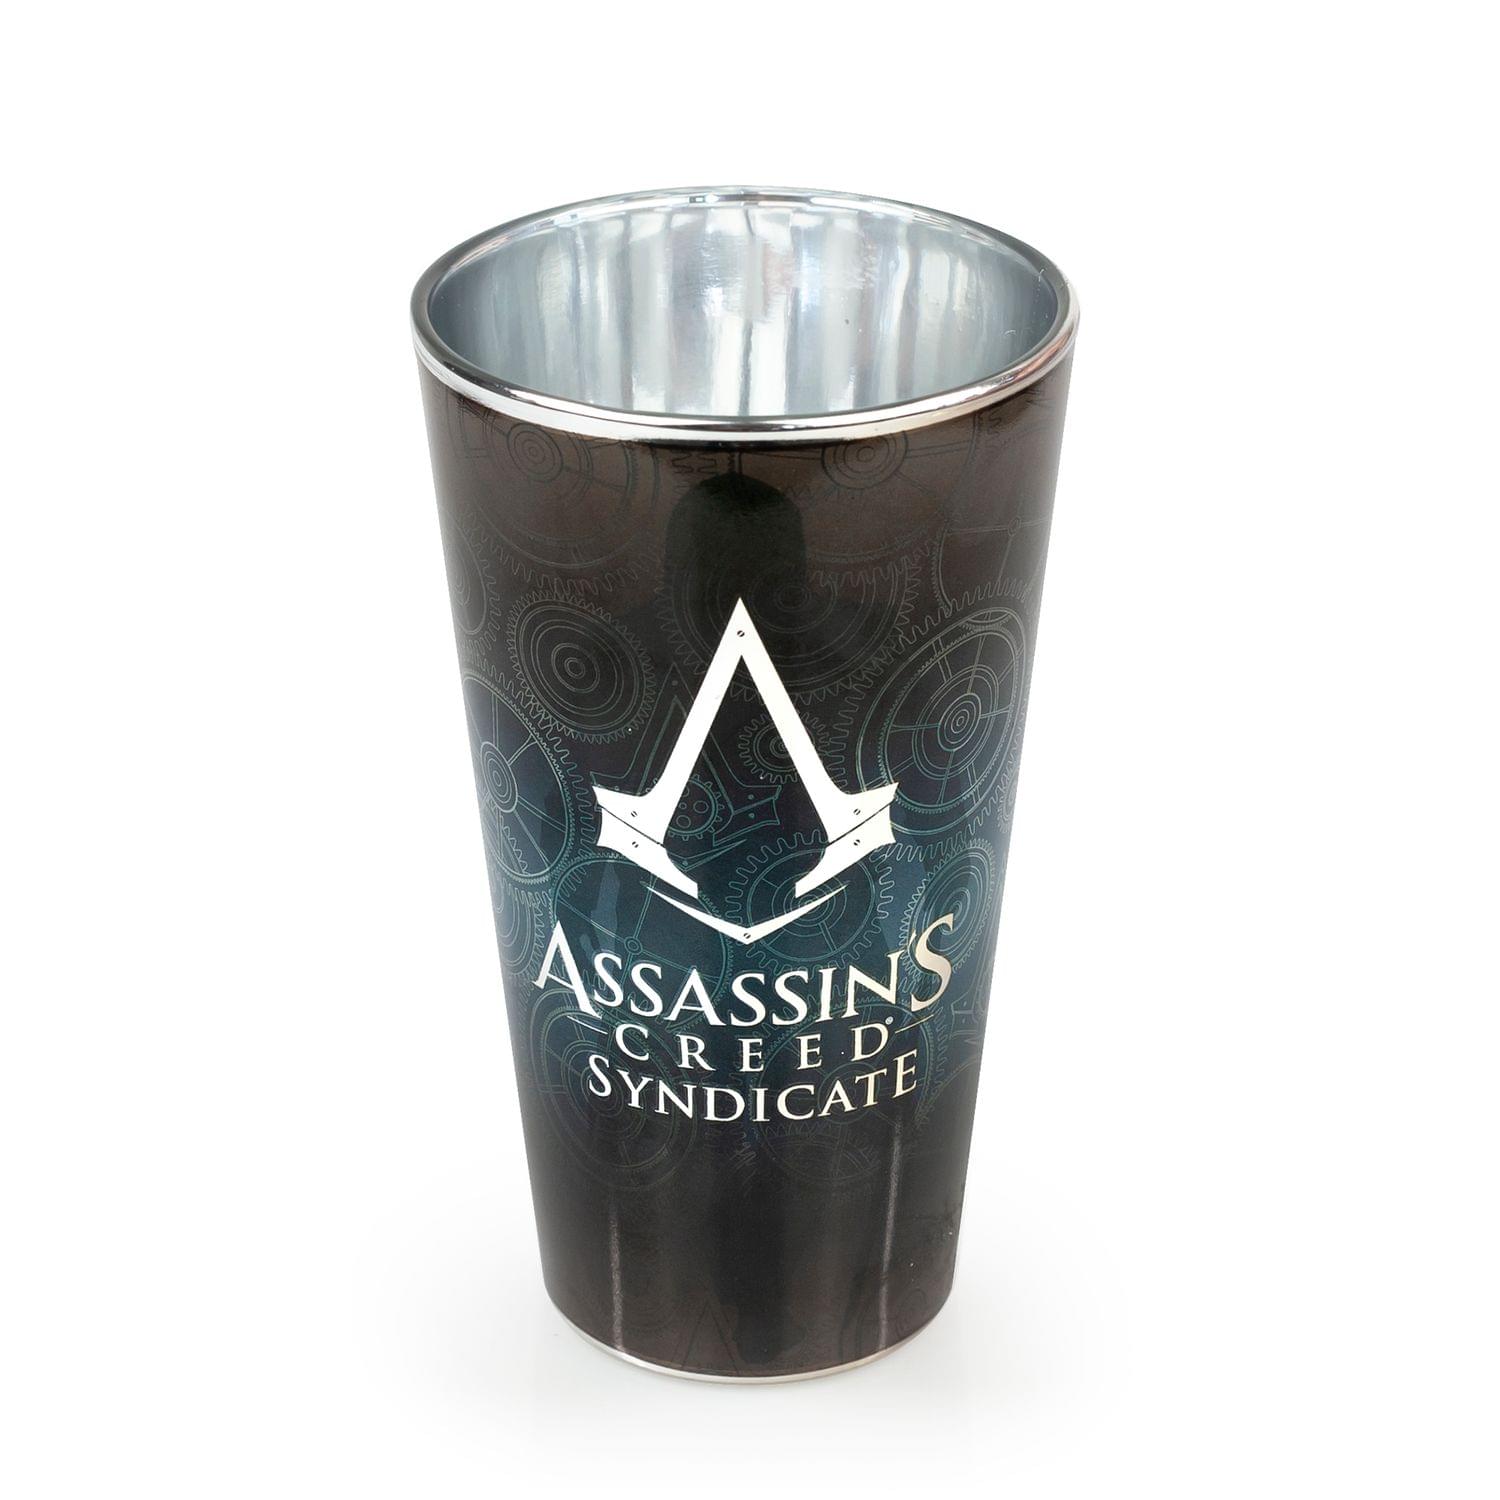 Assassin's Creed Syndicate 16oz Pint Glass Cup